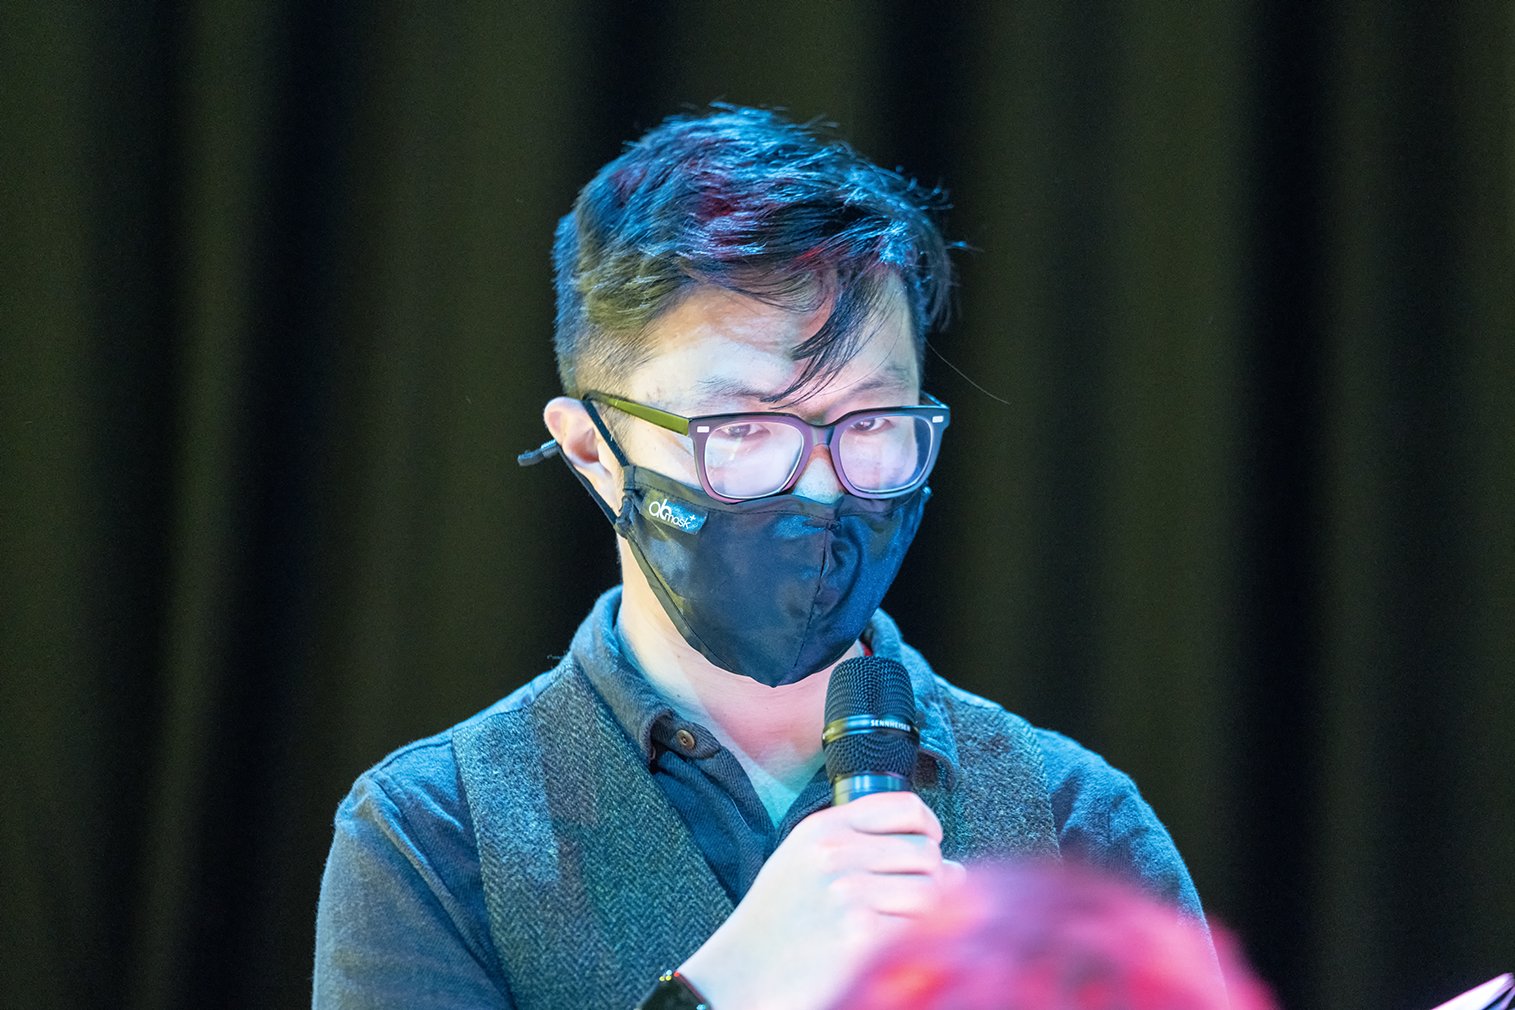 Man wearing glasses and a black mask talking into a mic